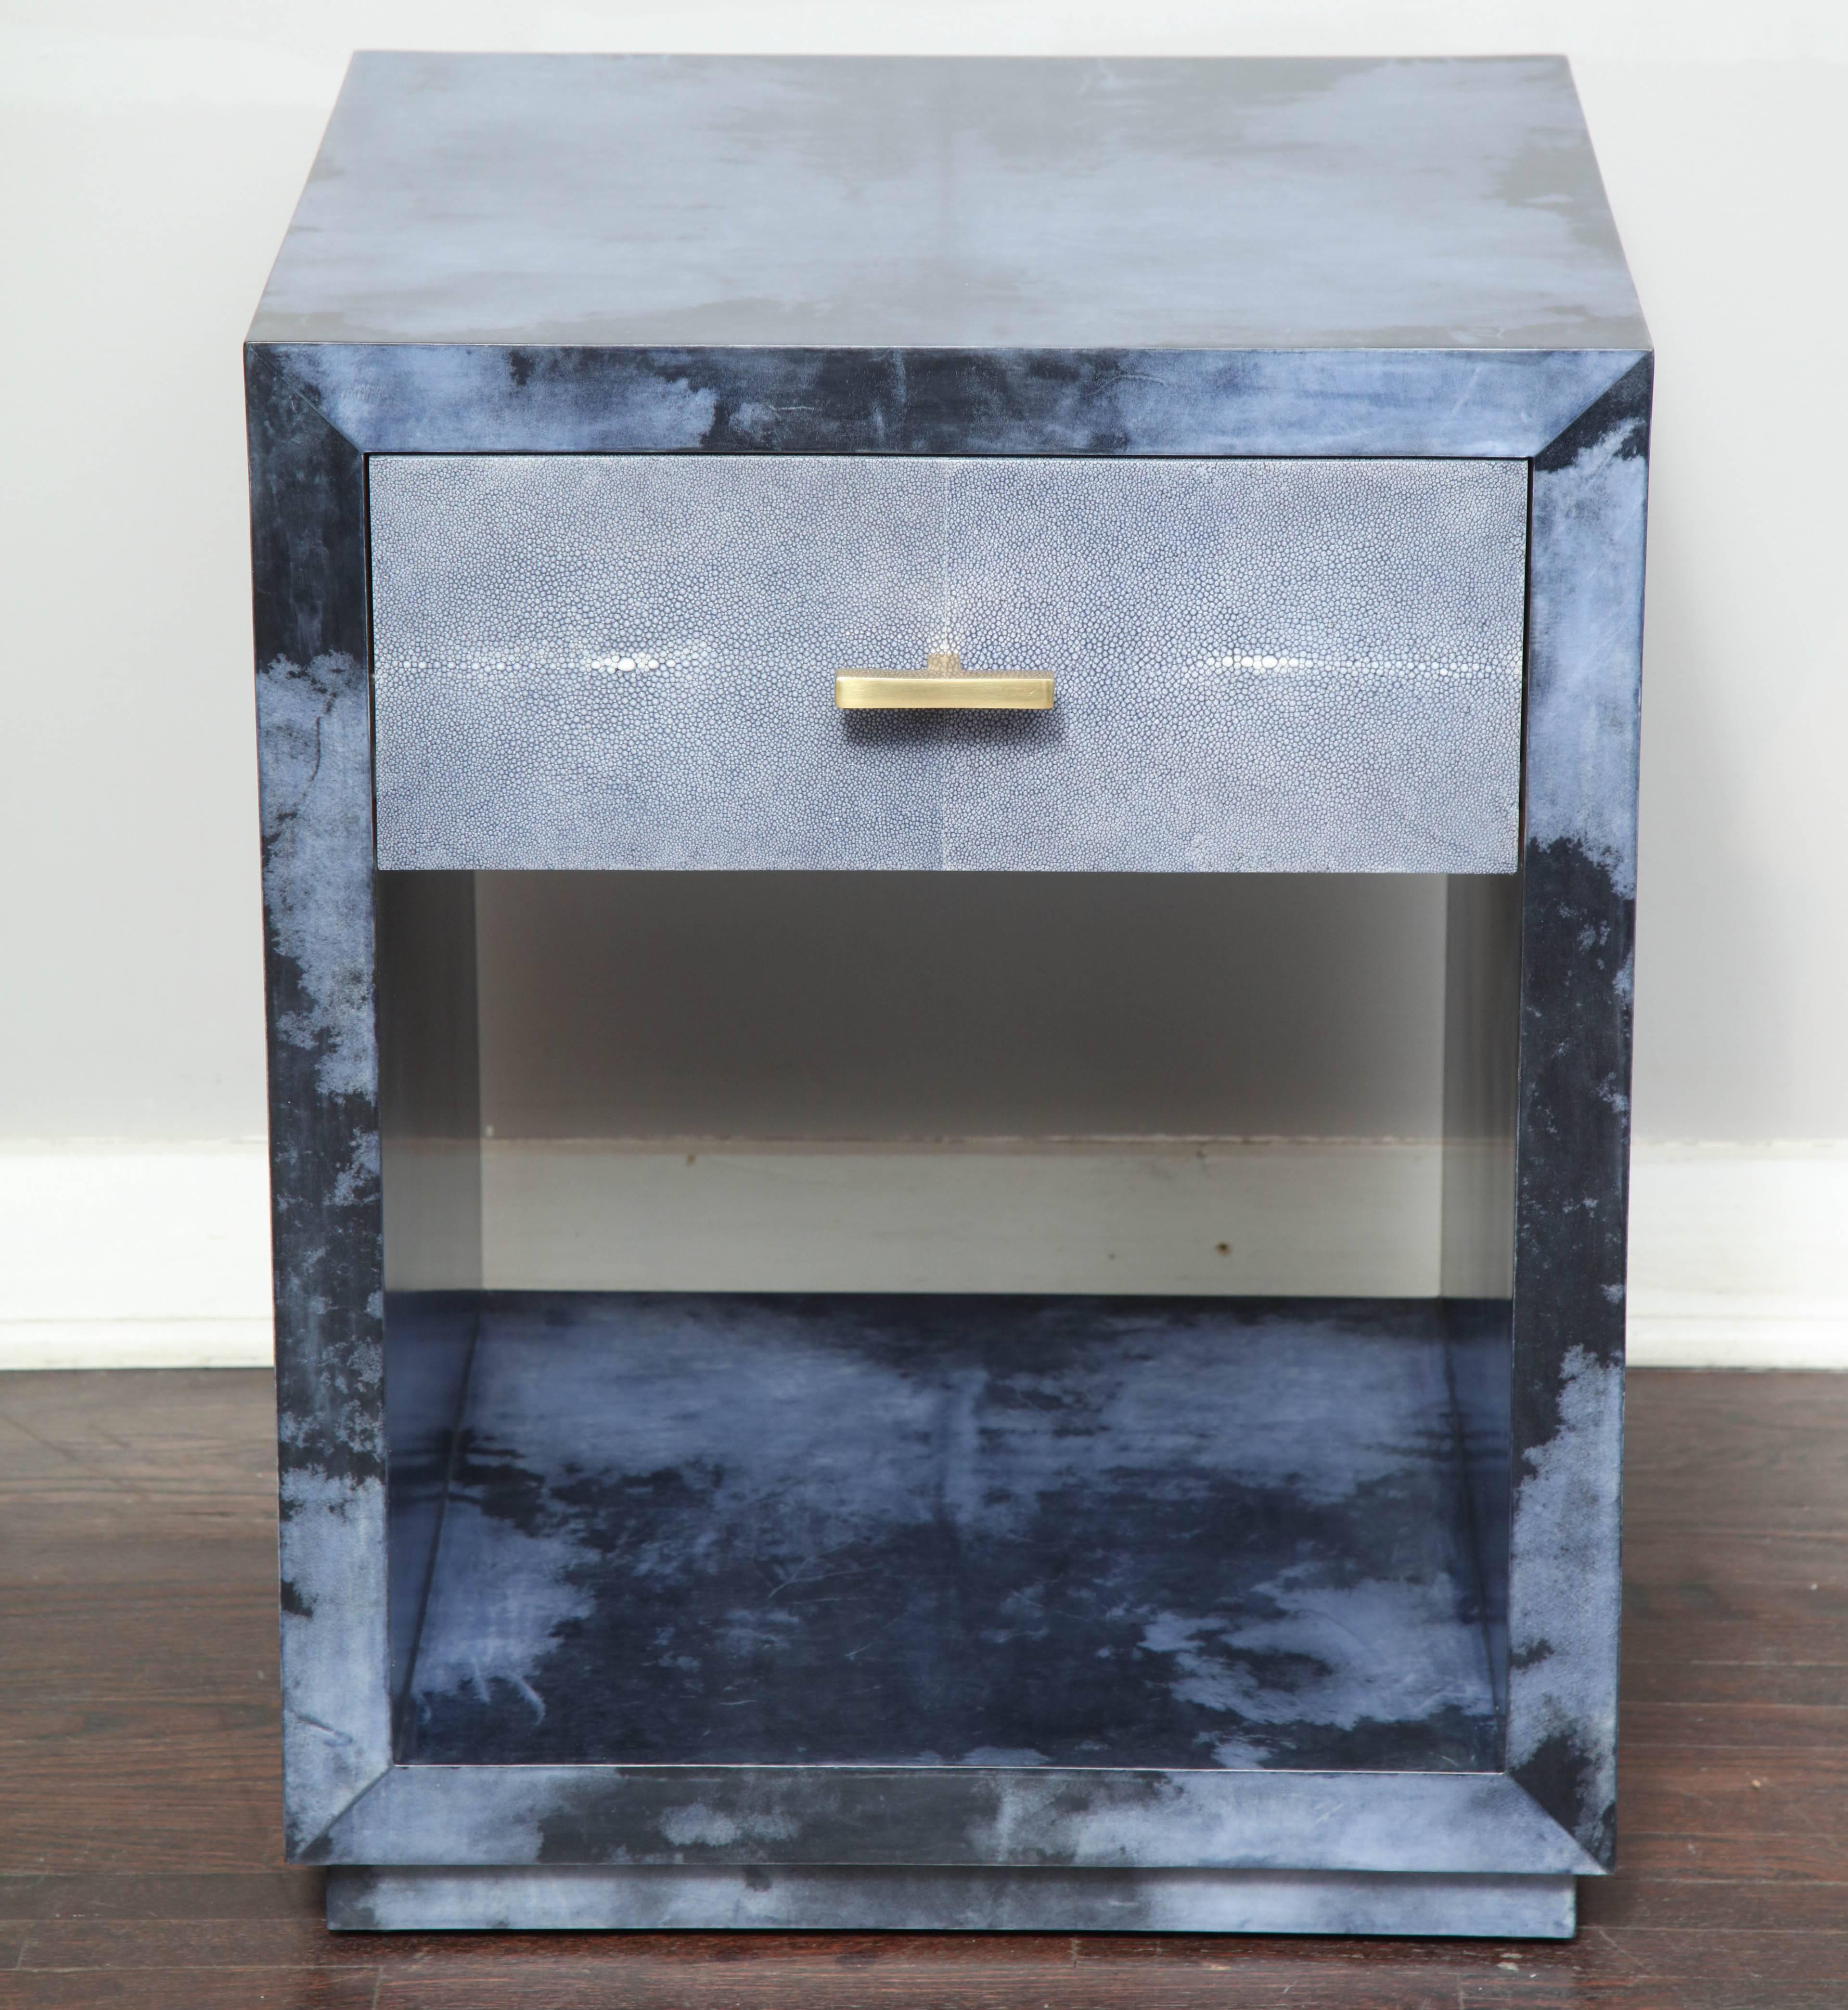 Dyed Set of 2 Parchment Nightstands with Genuine Shagreen Drawer Fronts